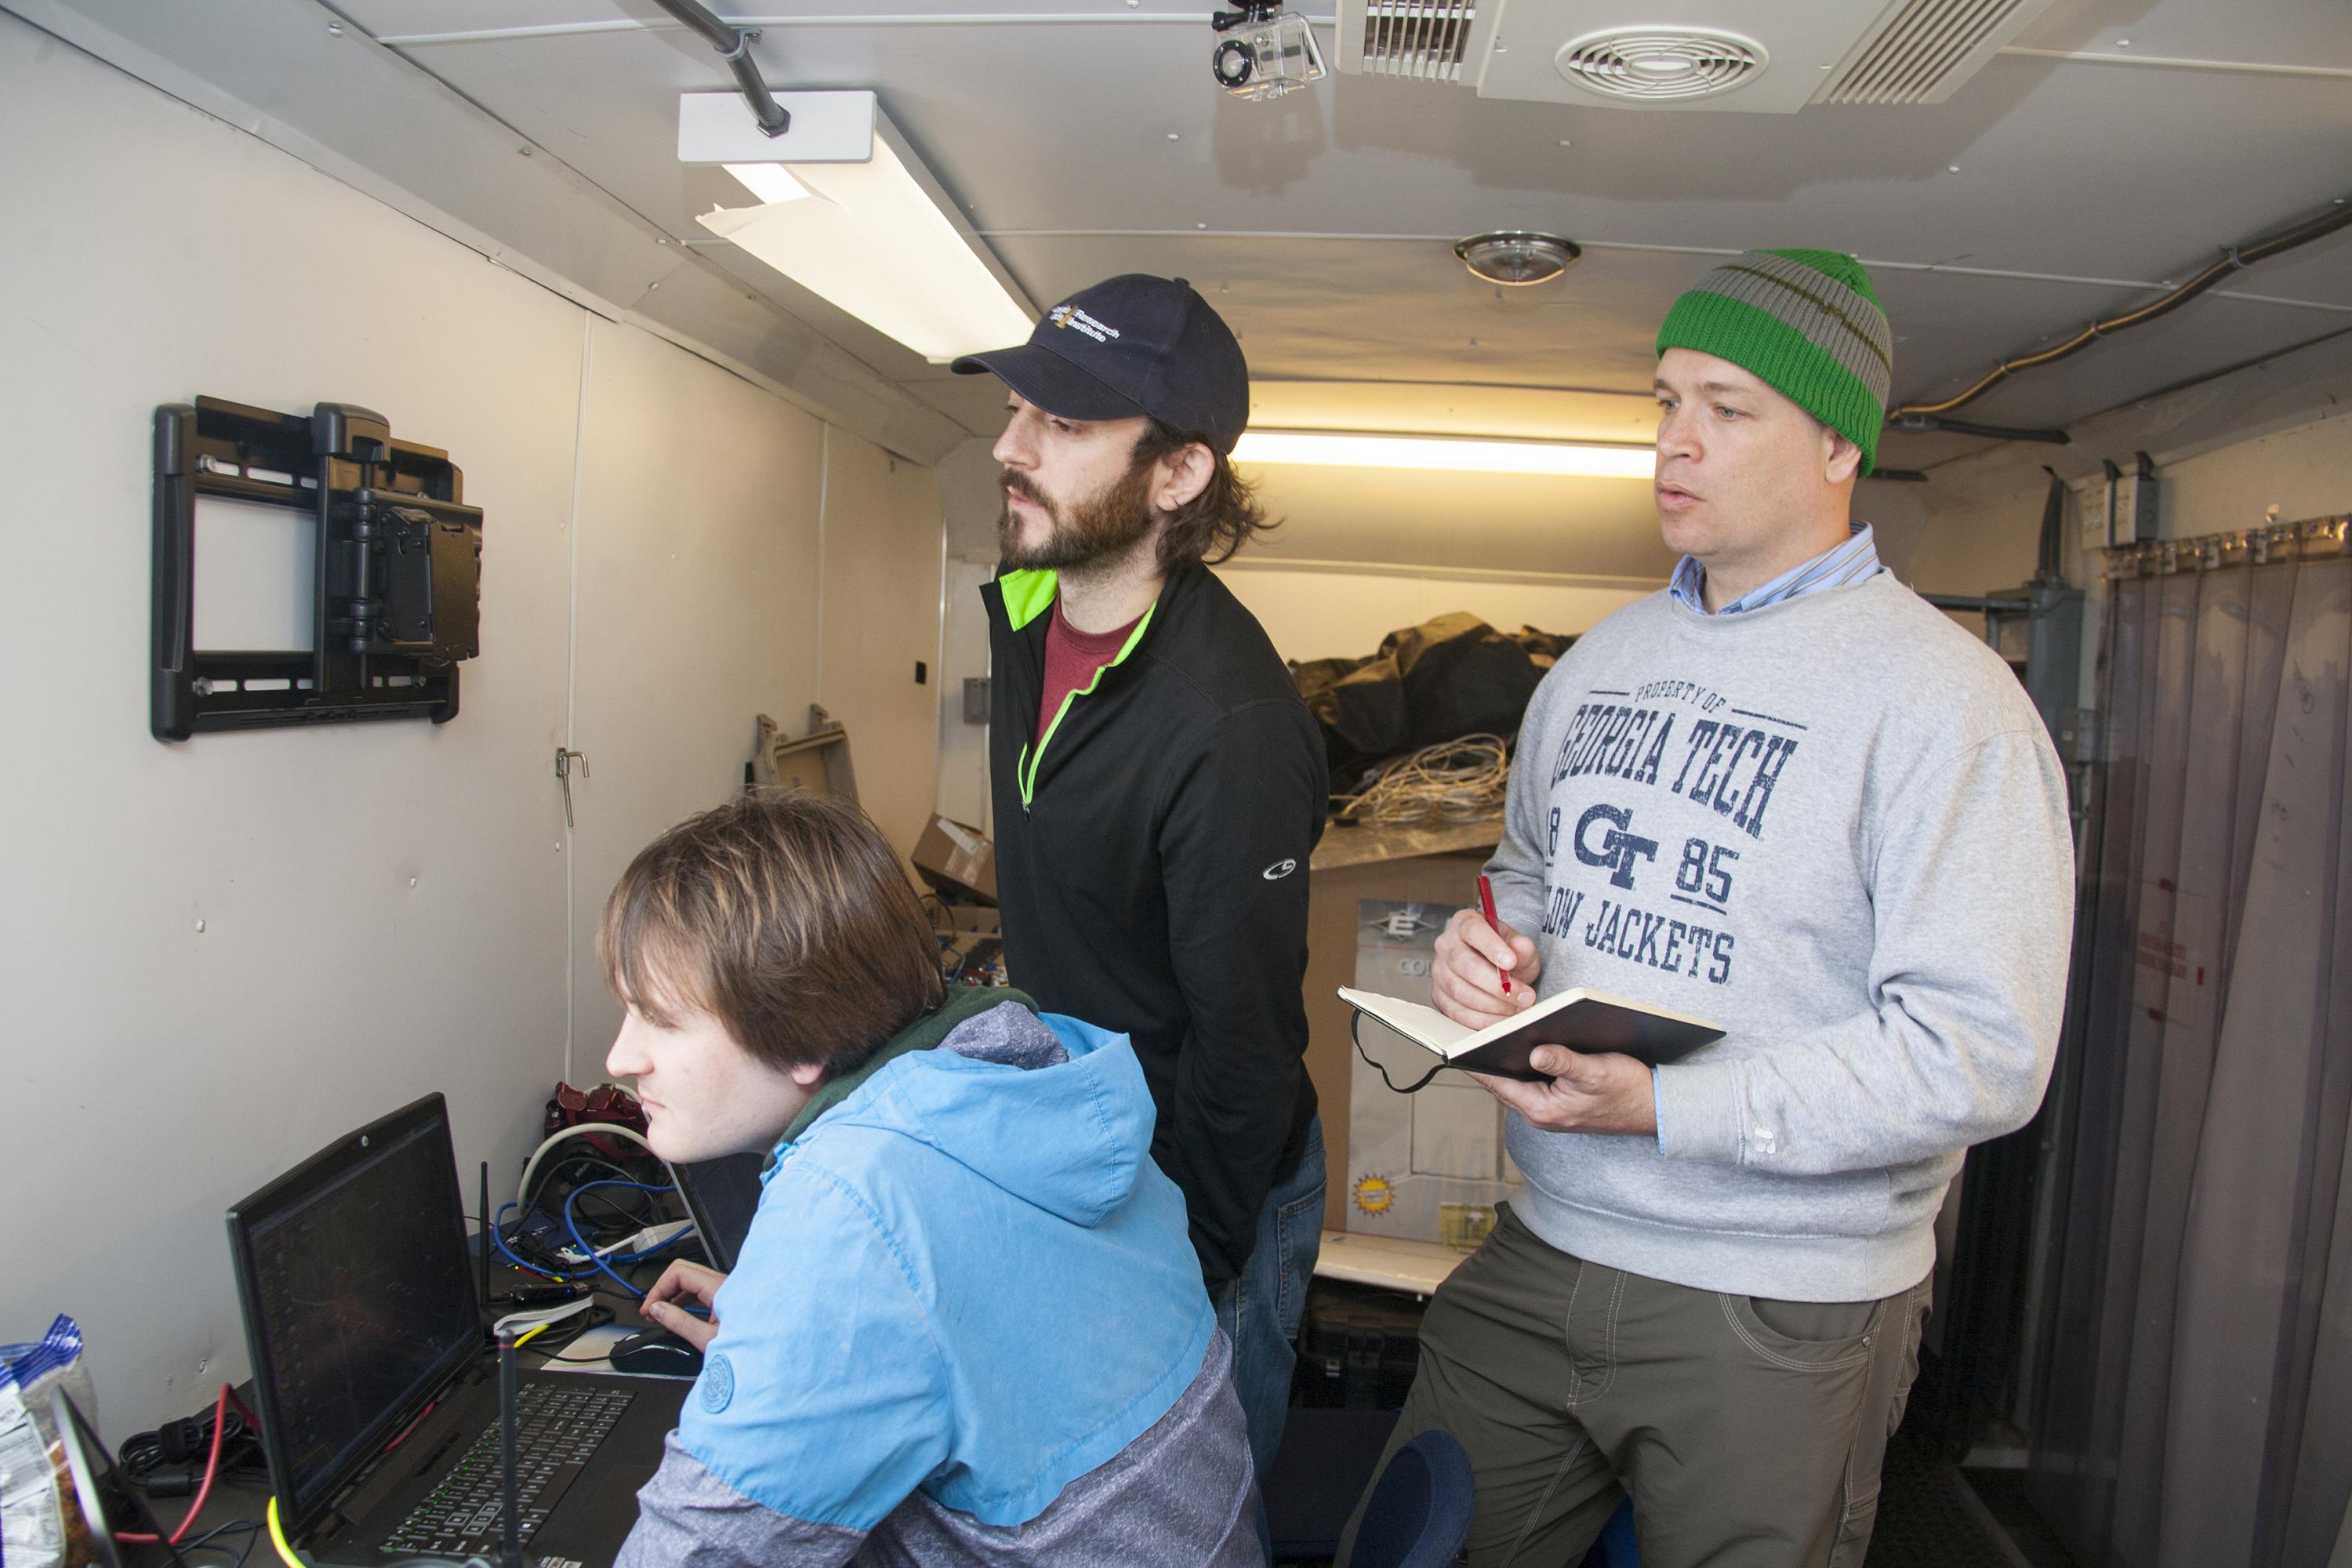 Georgia Tech Research Institute team members (l-r) David Jensen, Kevin DeMarco and Charles Pippin are shown preparing for a demonstration between two swarms of unmanned air vehicles. (U.S. Navy photo by Javier Chagoya)